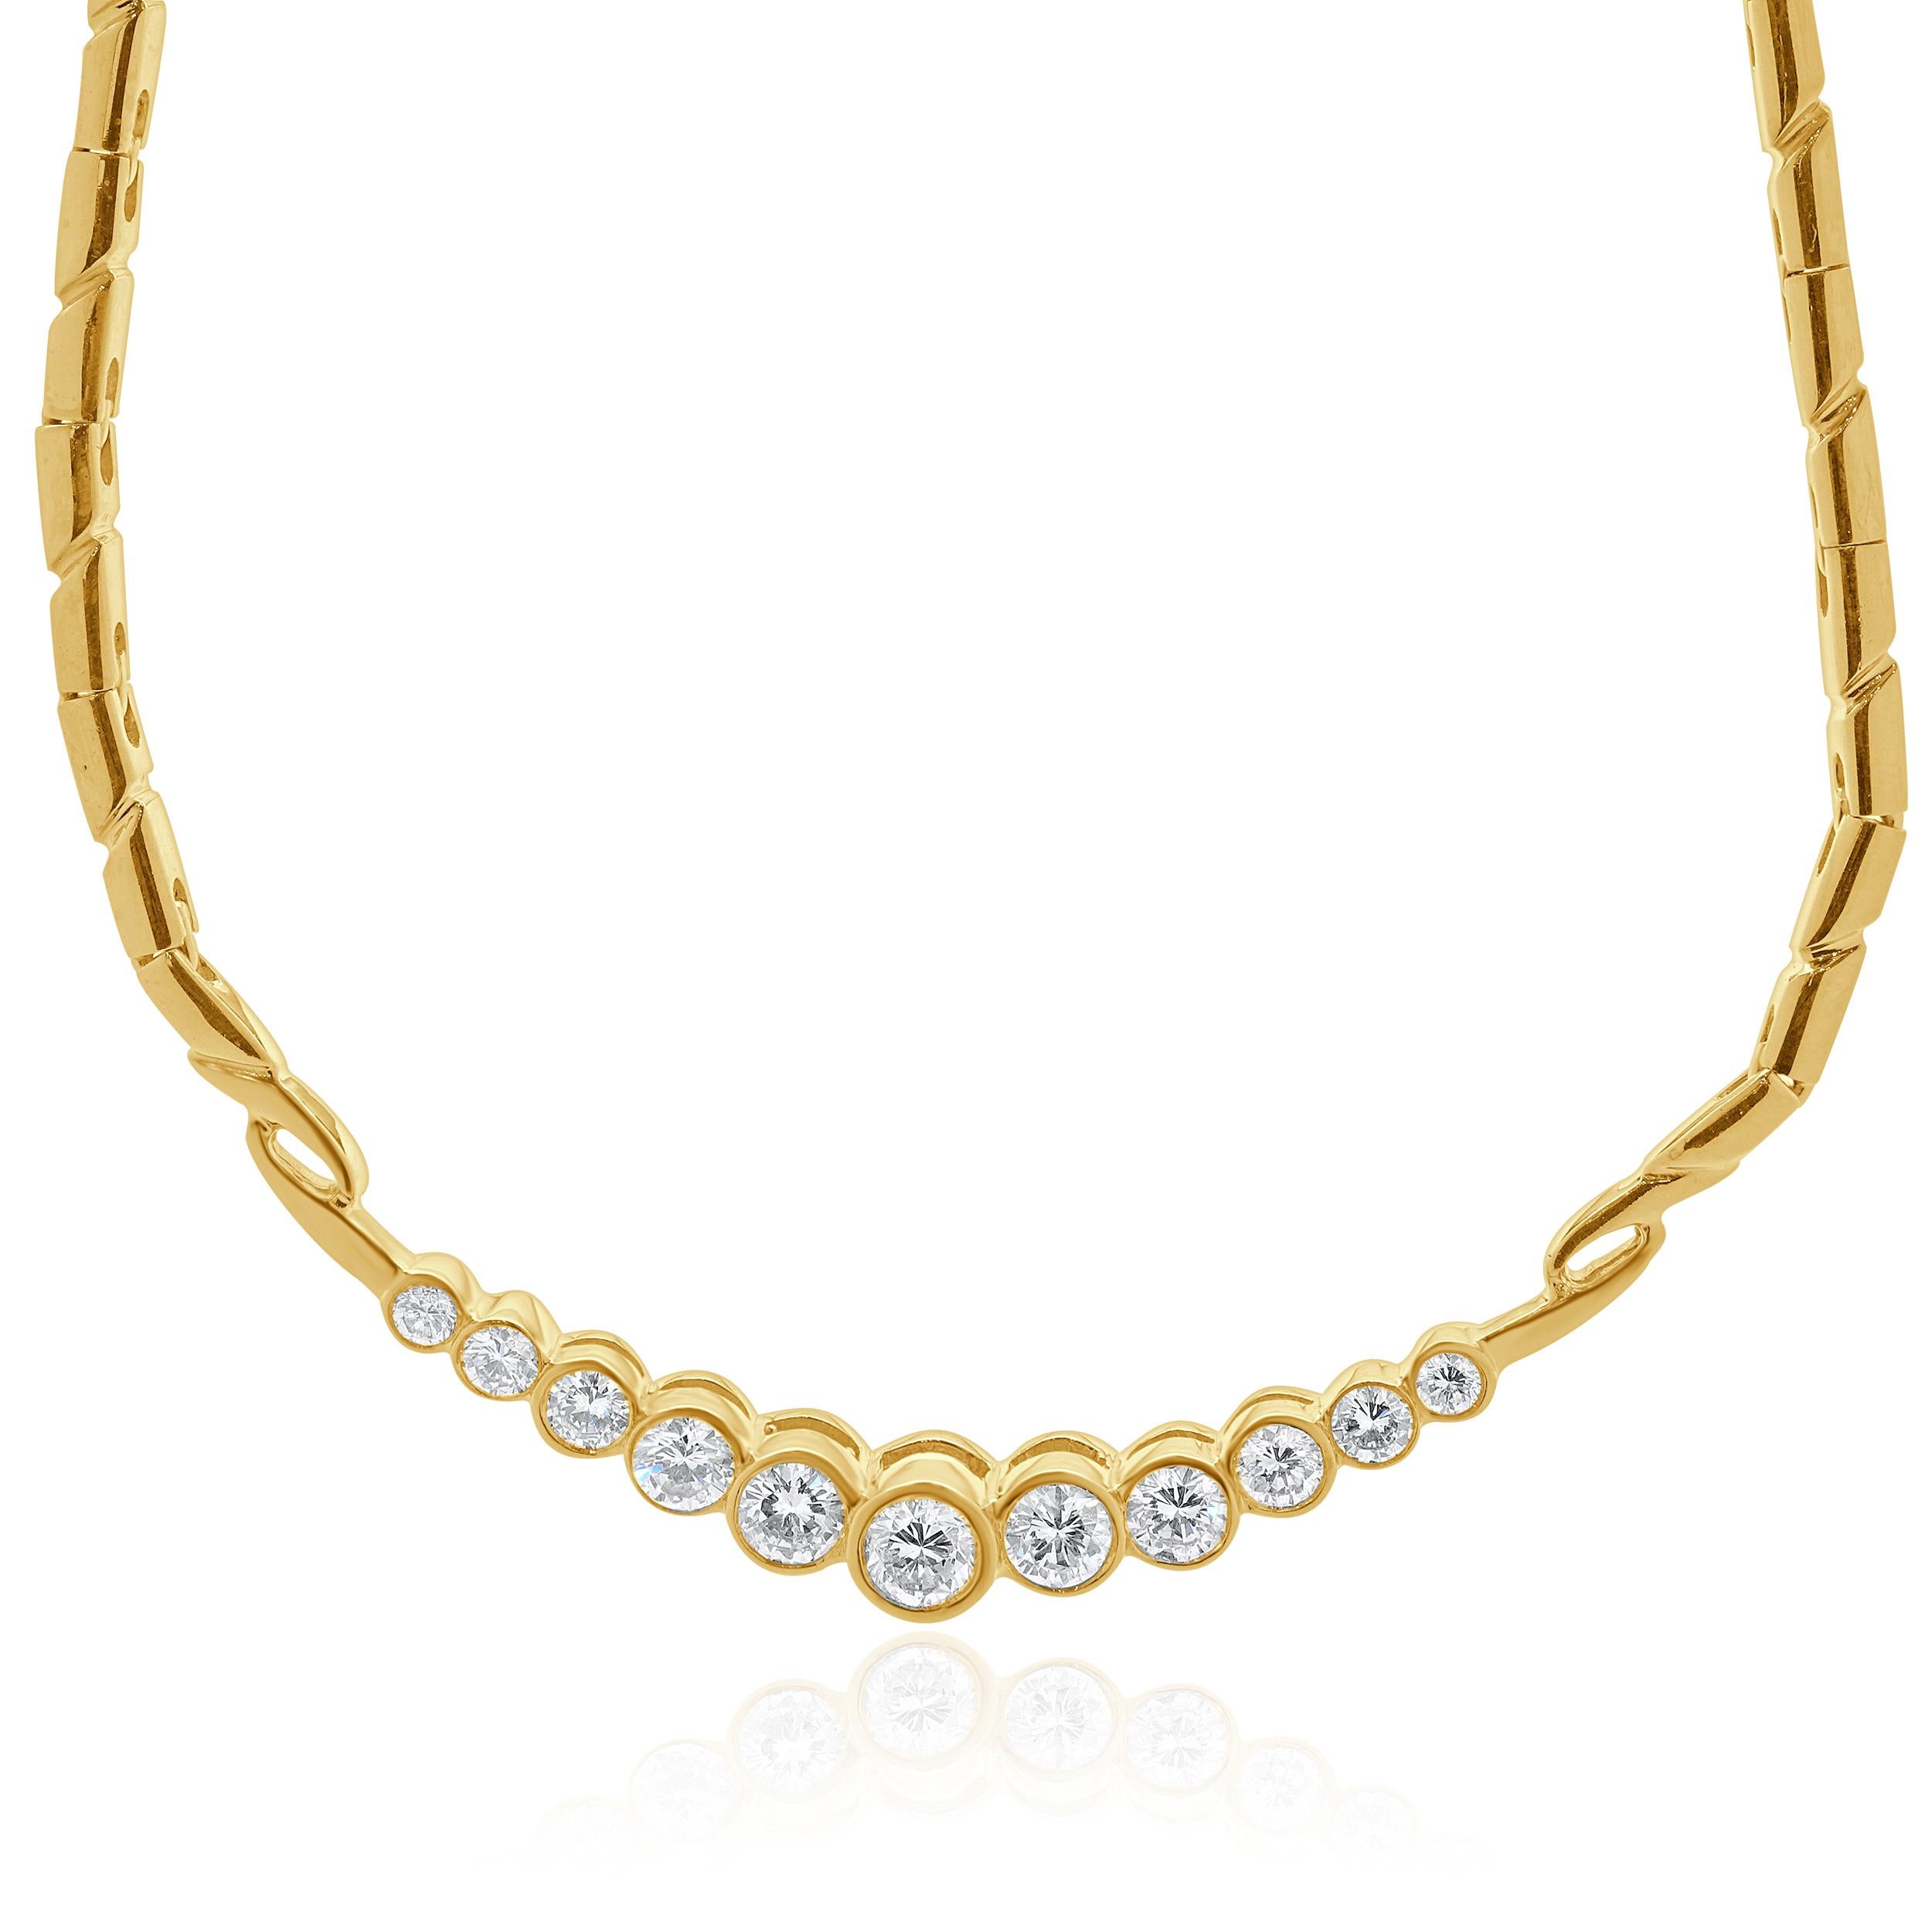 Designer: custom
Material: 14K yellow gold
Diamonds: 11 round brilliant cut = 1.64cttw
Color: H
Clarity: SI1-2
Dimensions: necklace measures 18-inches in length 
Weight: 18.10 grams
